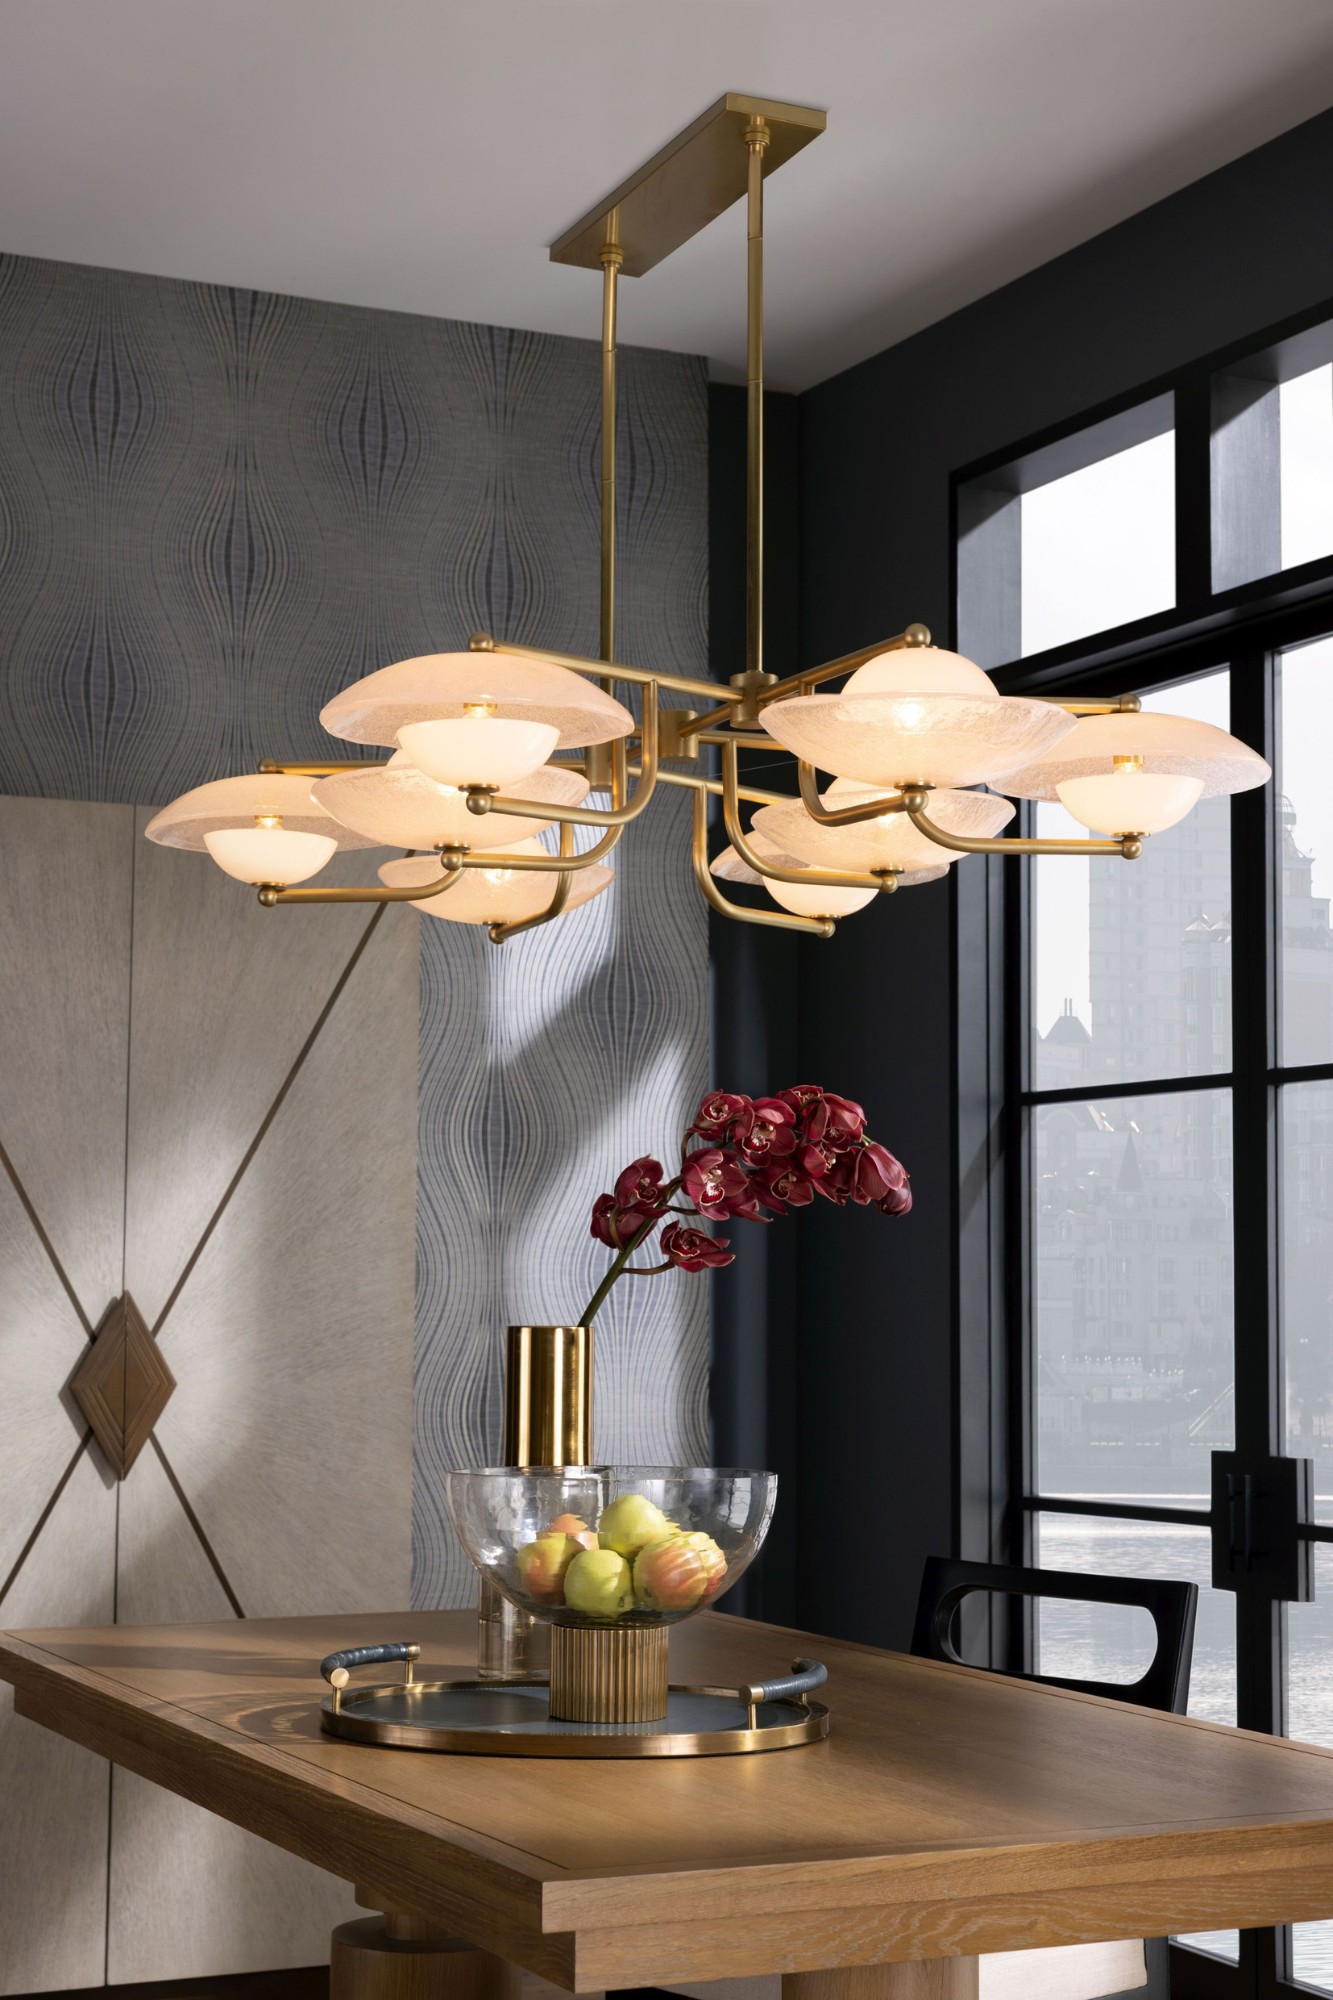 arteriors, Arteriors Introduces Latest Collection, and Four Clear Design Trends